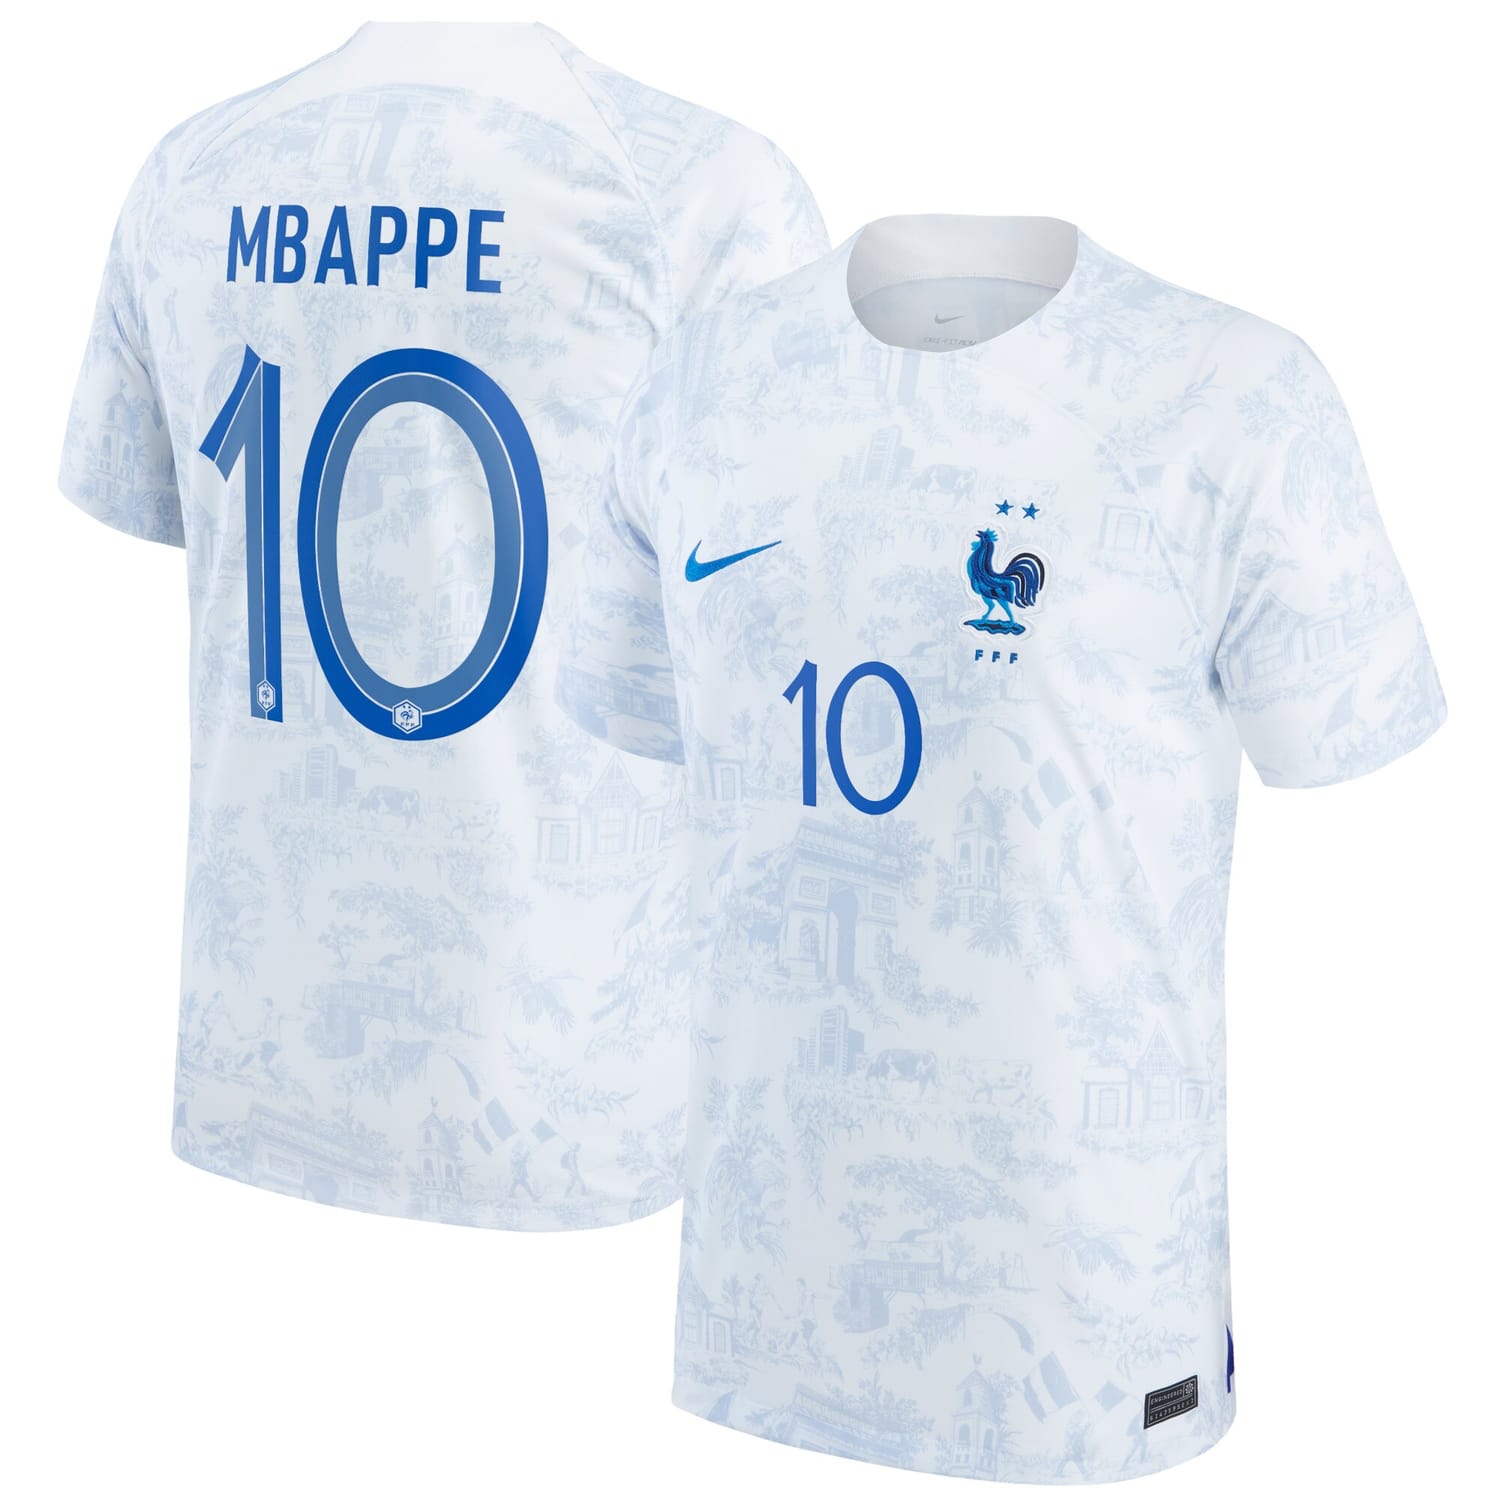 France National Team Away Jersey Shirt 2022 player Kylian Mbappe printing for Men